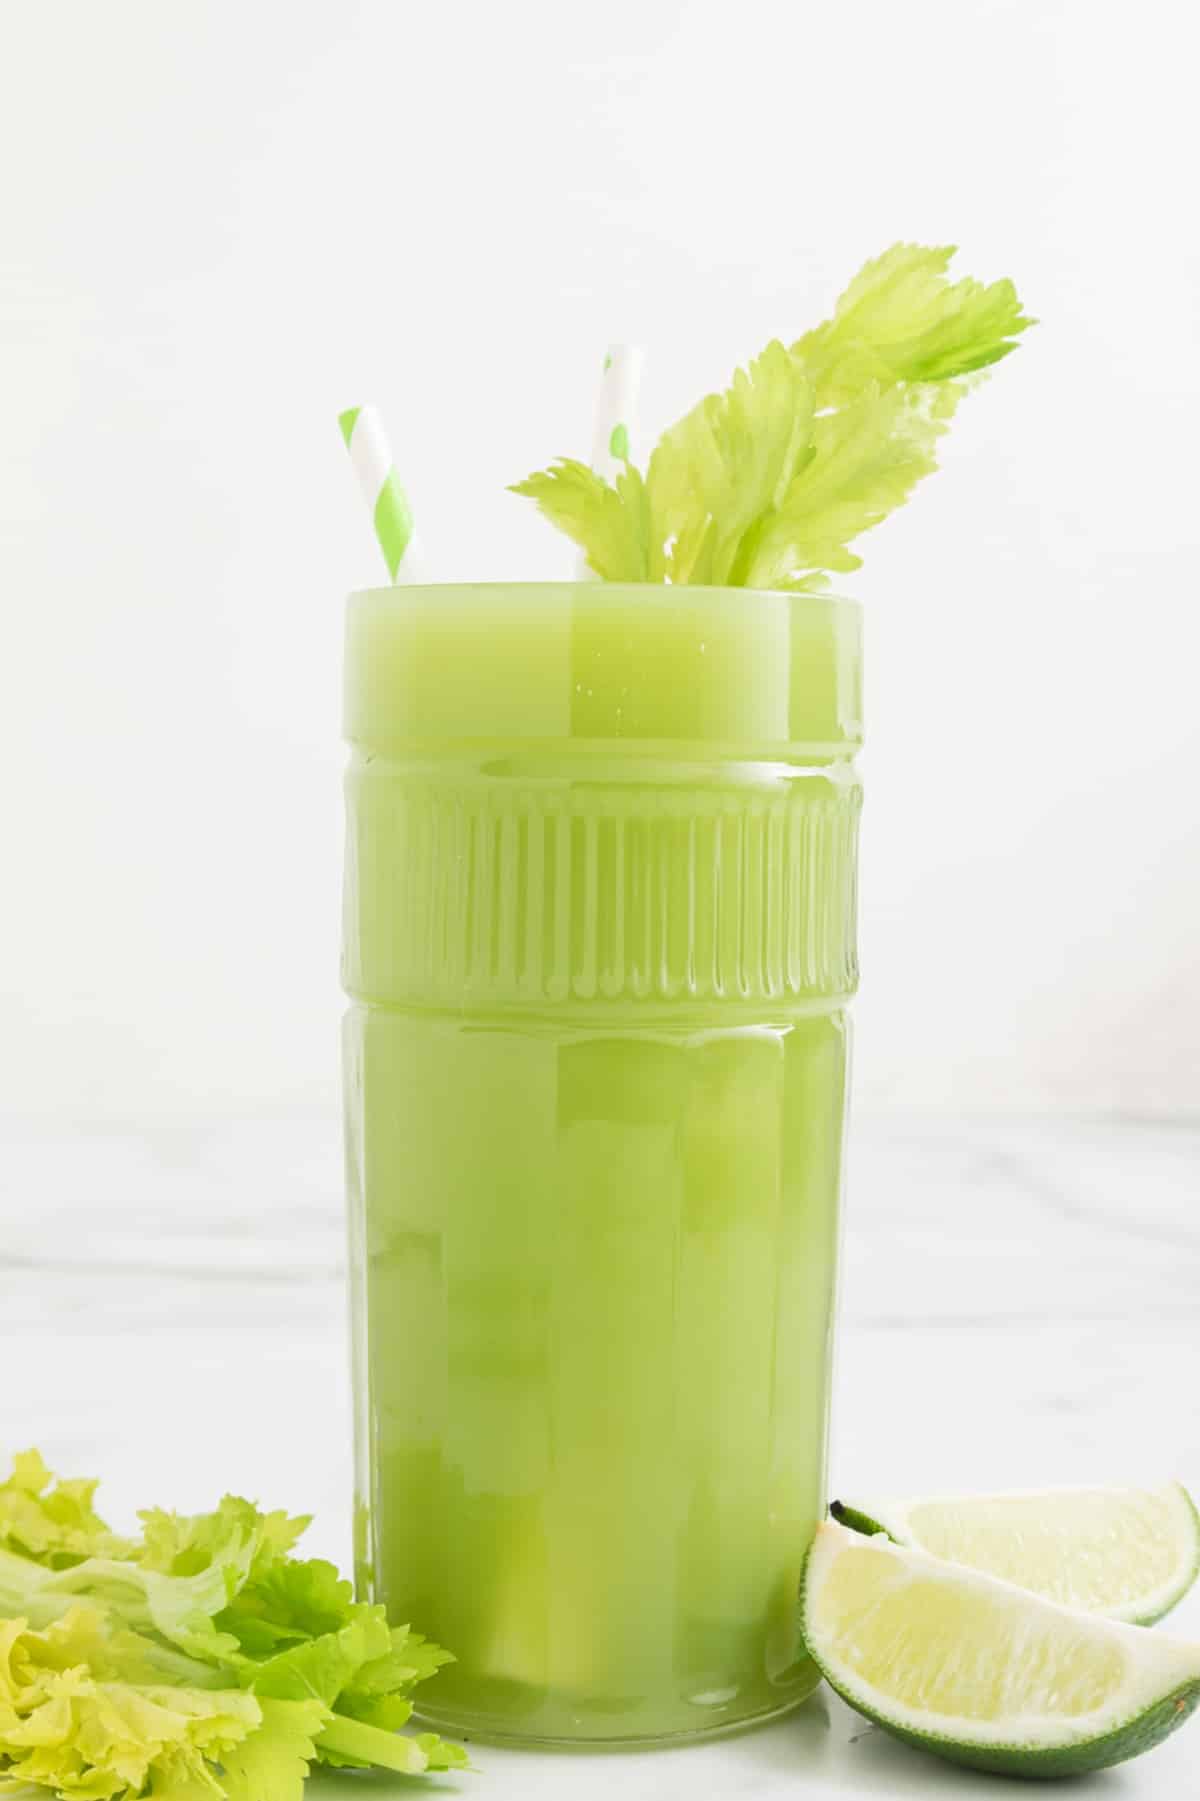 large glass of celery lime juice garnished with celery leaves.